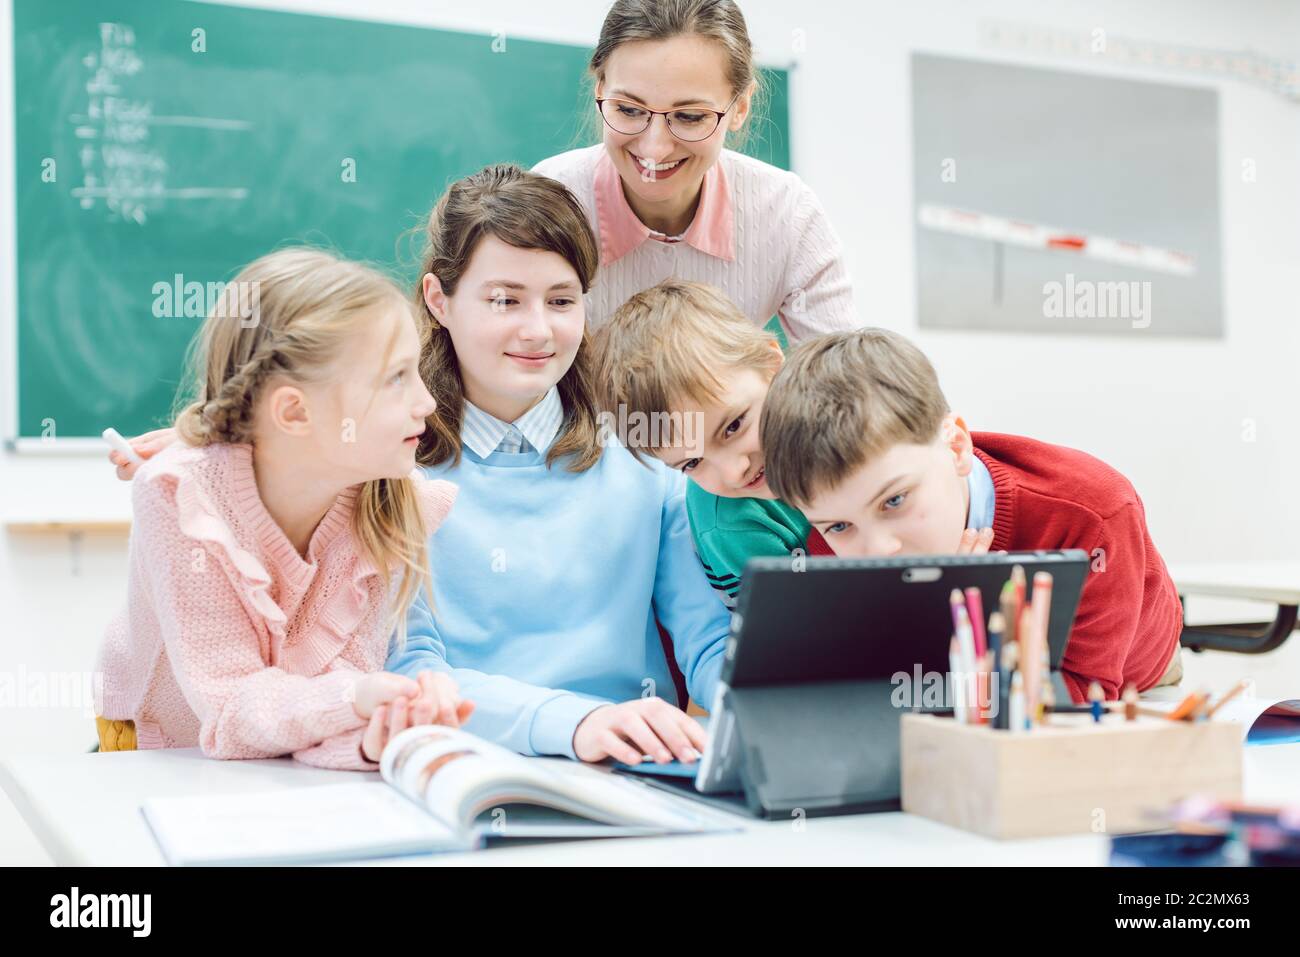 Educational Film High Resolution Stock Photography and Images - Alamy